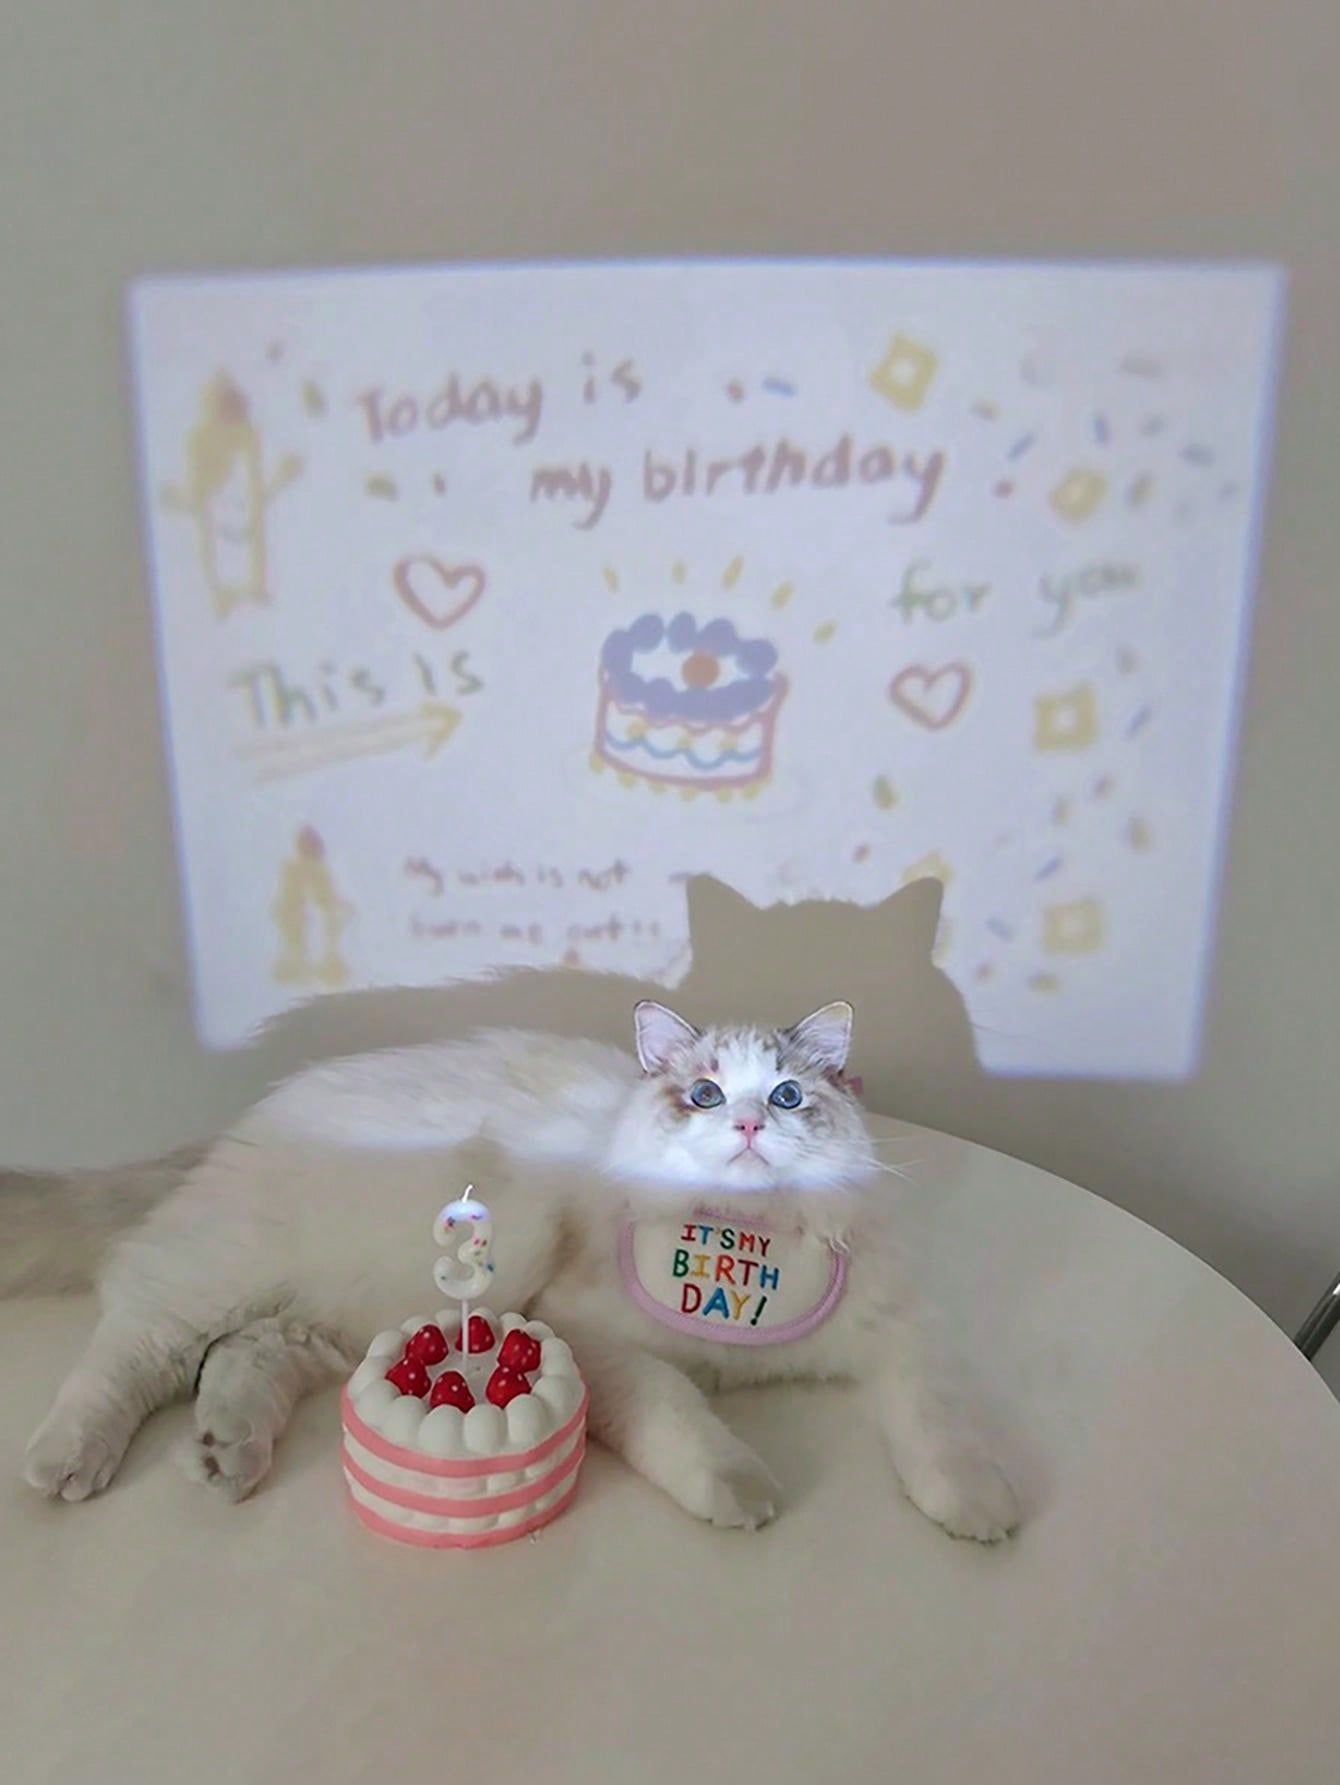 1pc Random Color Led Light With 'today Is My Birthday' Image, Portable Mini Party Projector Suitable For Indoor Pet Room Home Decoration